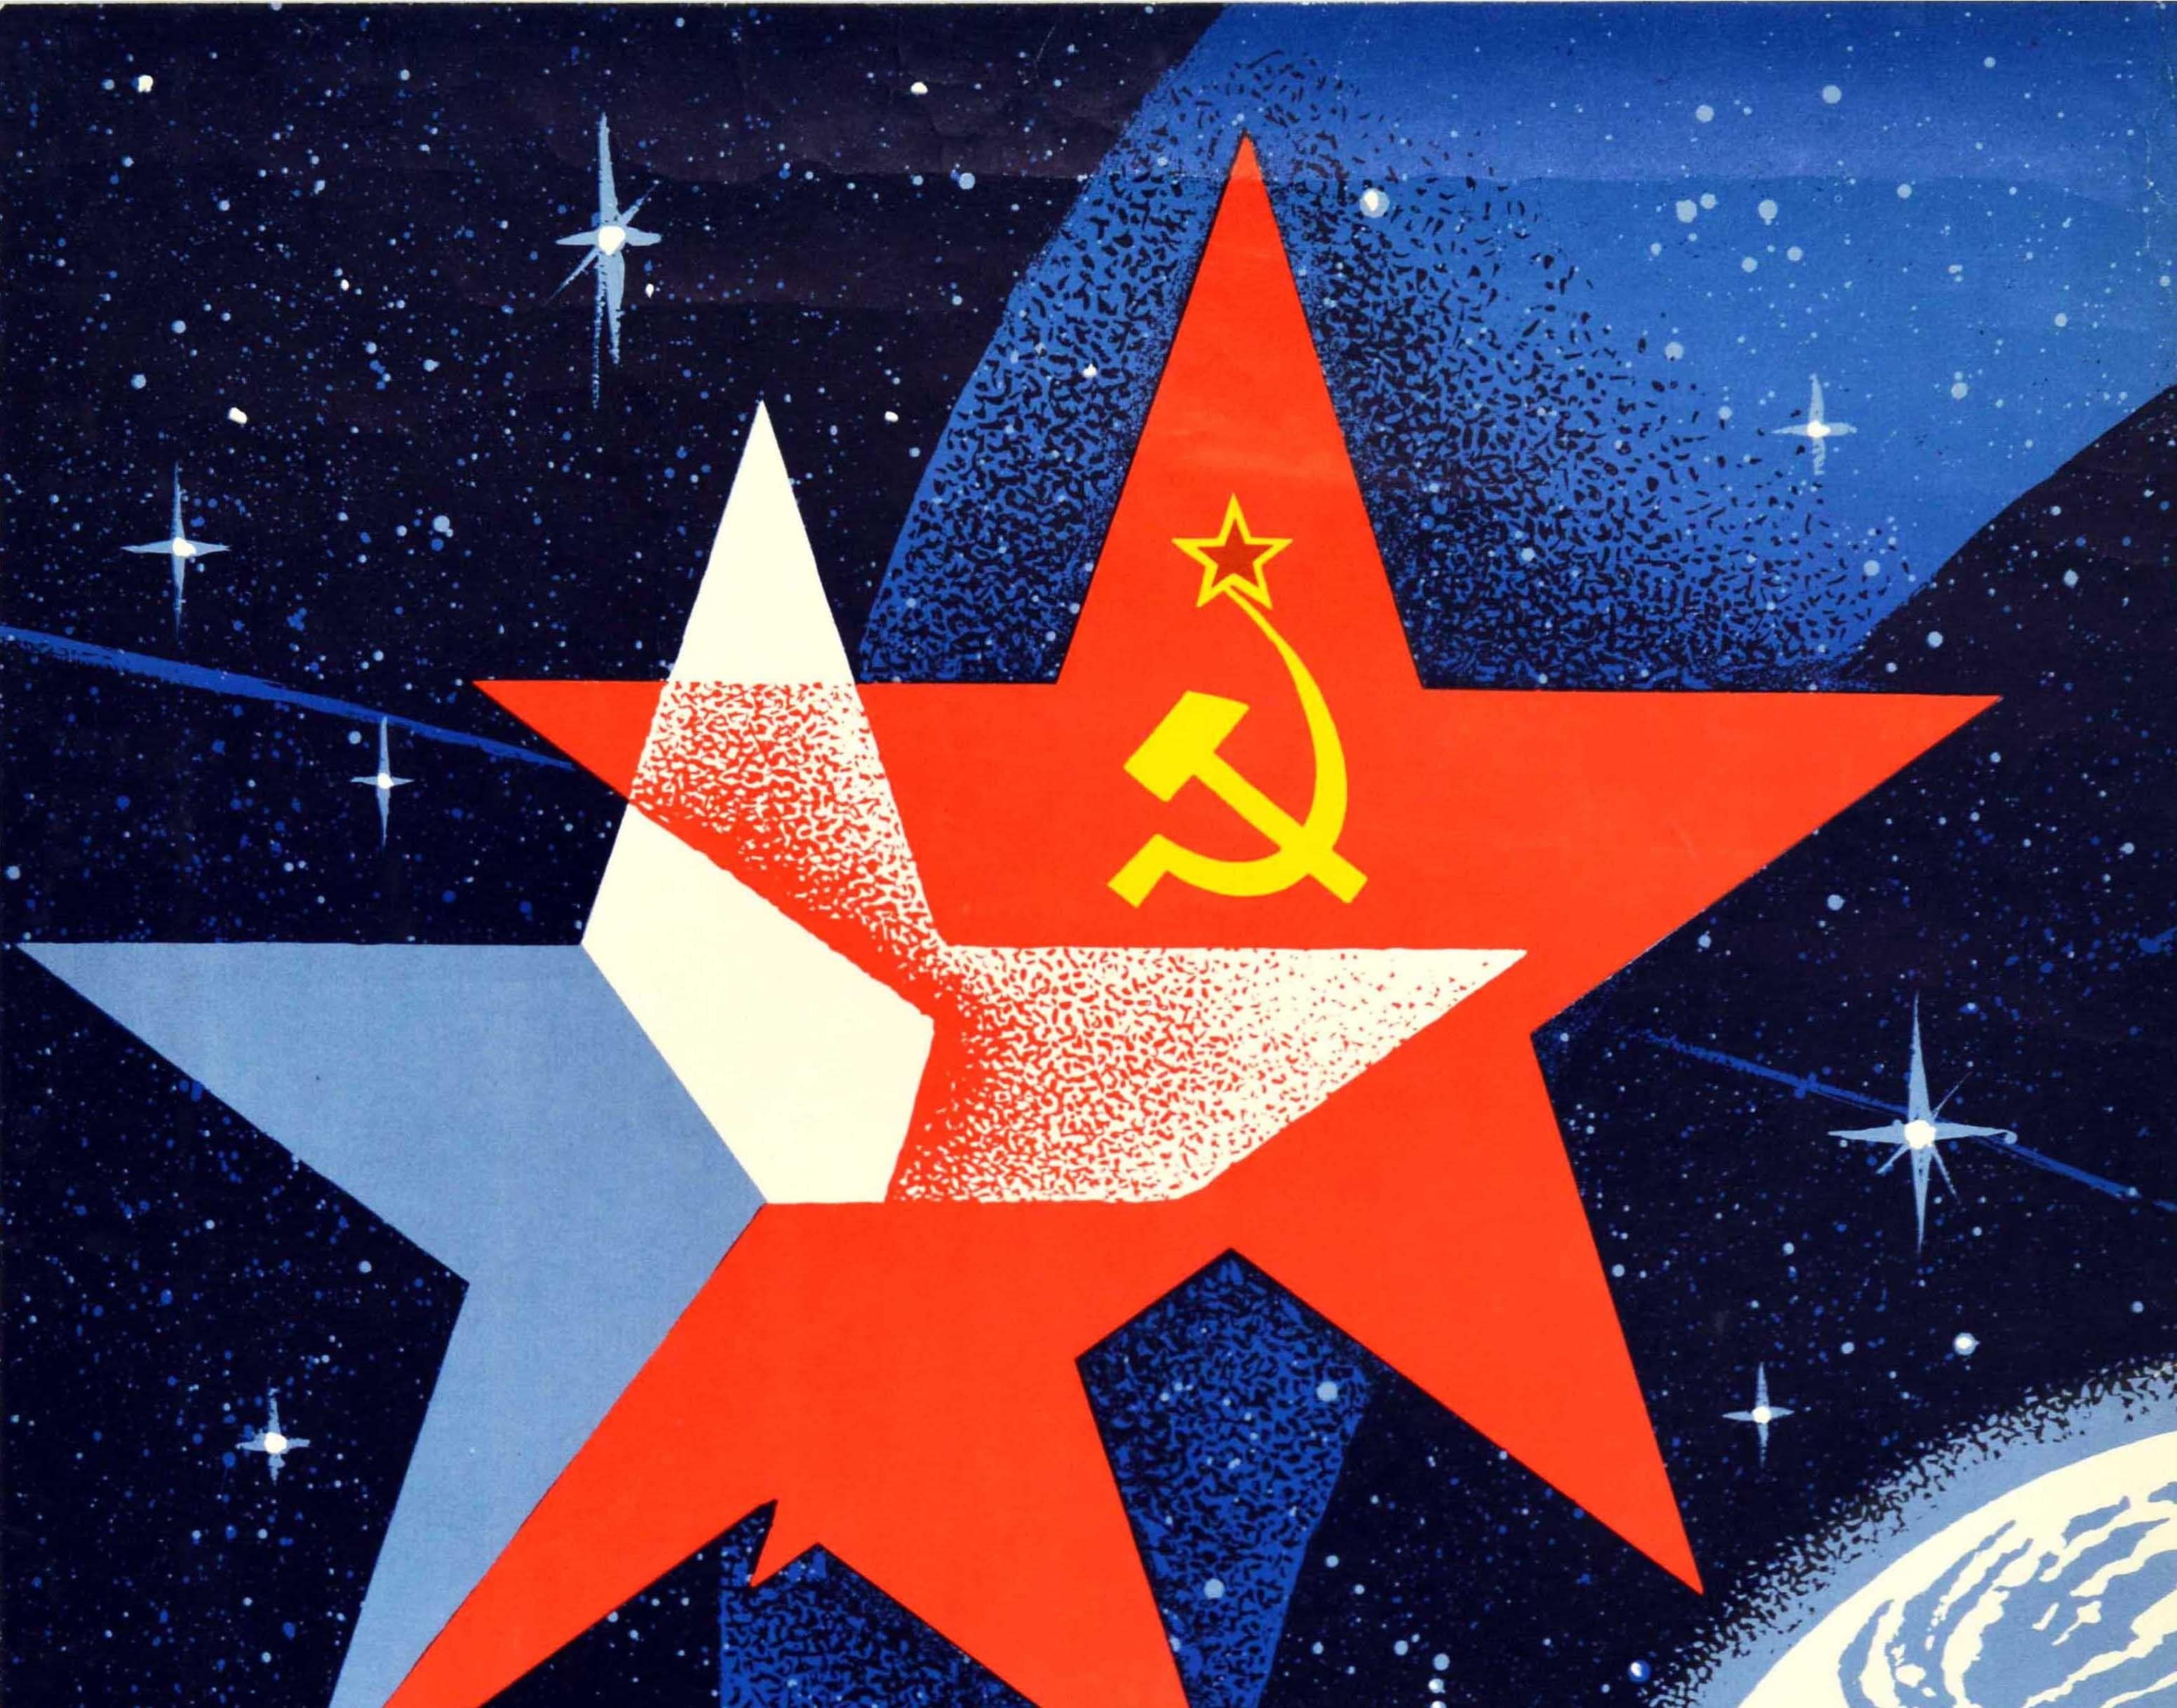 Original vintage Soviet space propaganda poster celebrating the joint Soviet-Czech Soyuz 28 ???? 28 space mission on 2 March 1978 featuring a great design depicting two stars representing the flag of Czechoslovakia and the hammer and sickle USSR